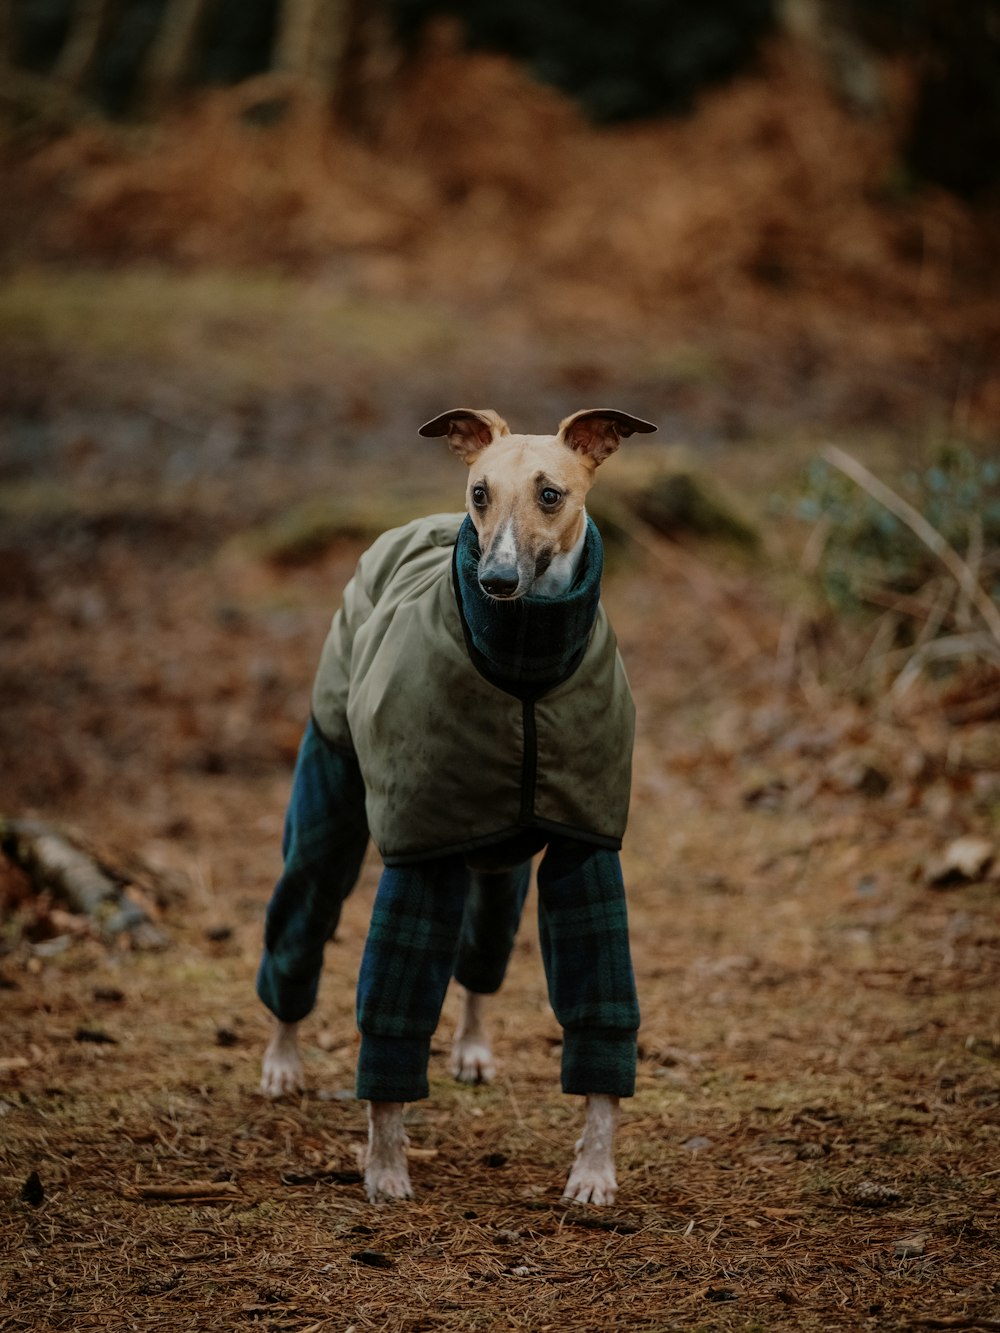 a small dog wearing a jacket and pants